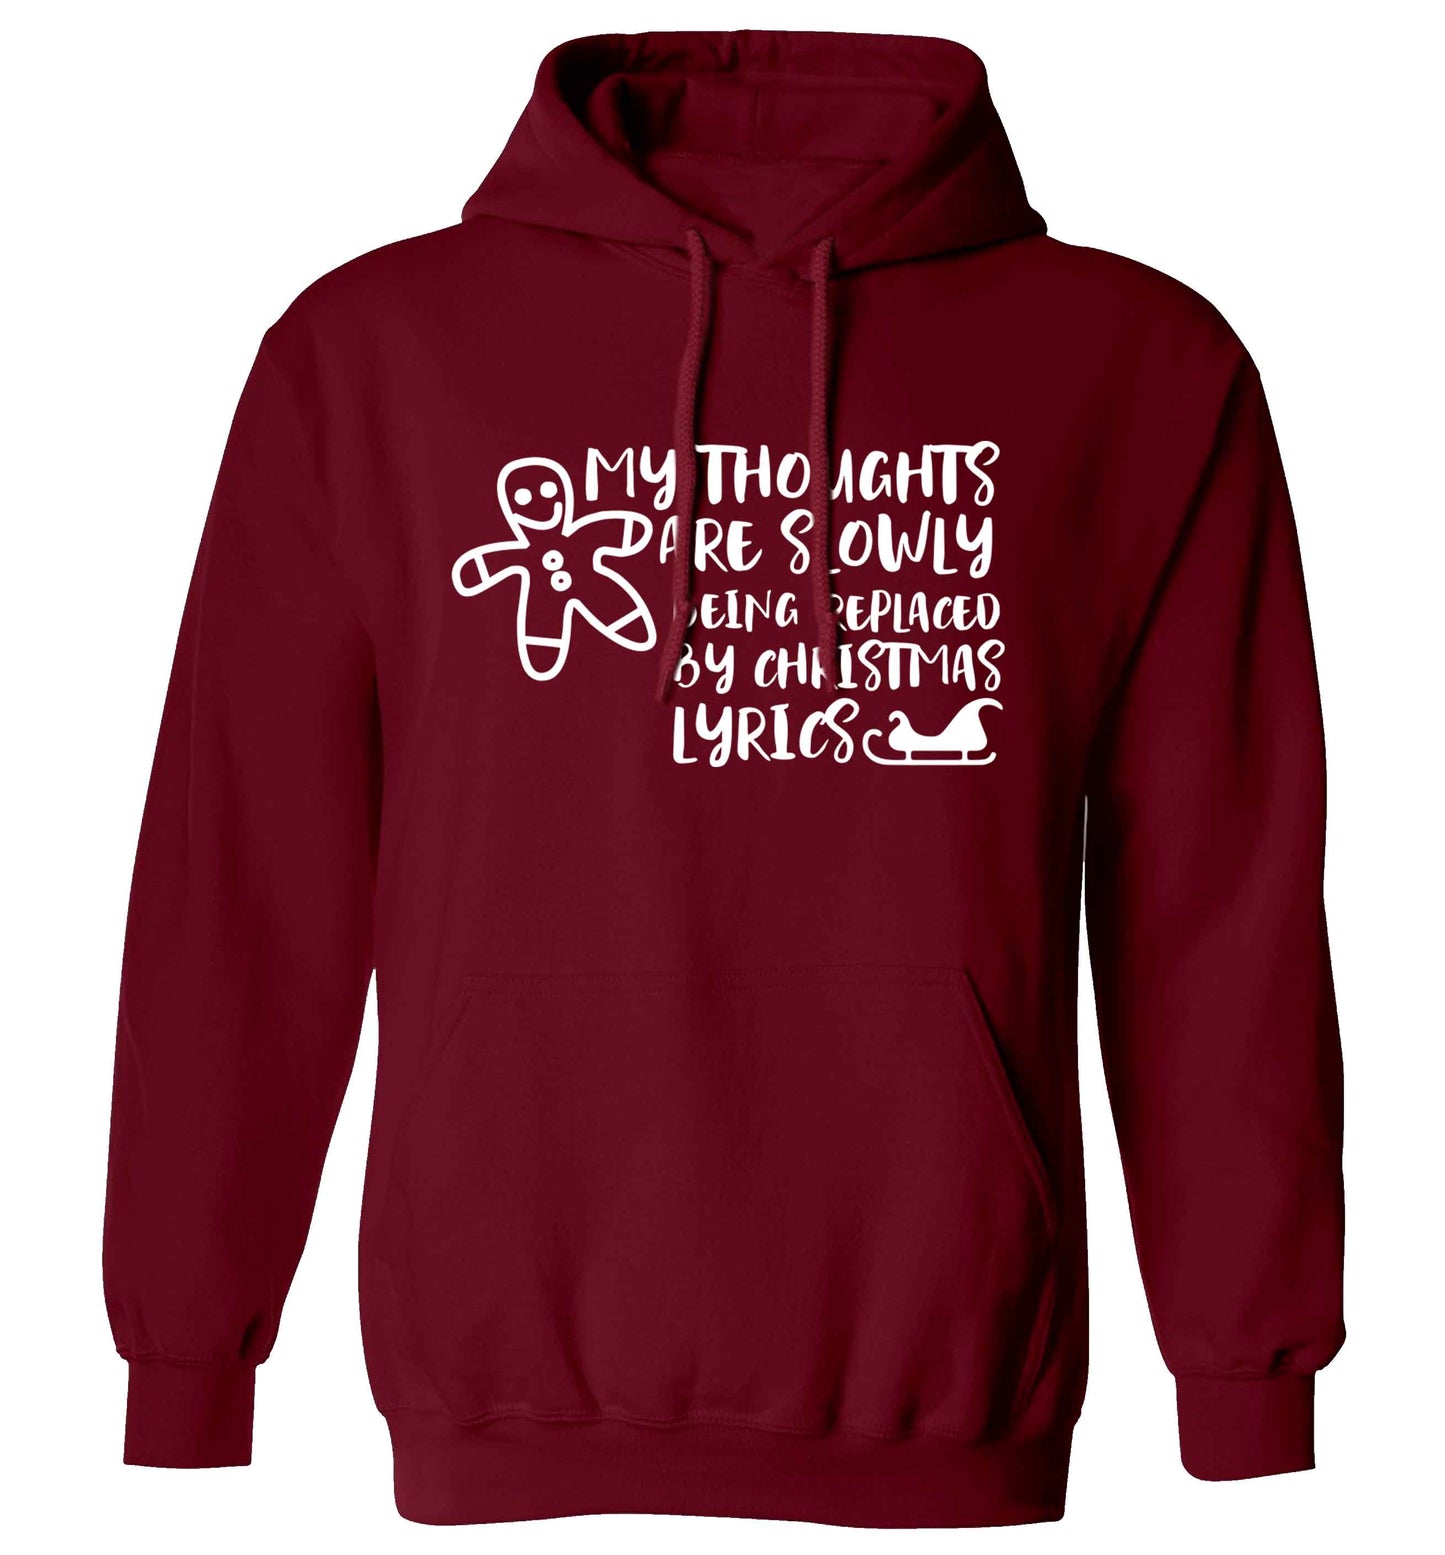 My thoughts are slowly being replaced by Christmas lyrics adults unisex maroon hoodie 2XL